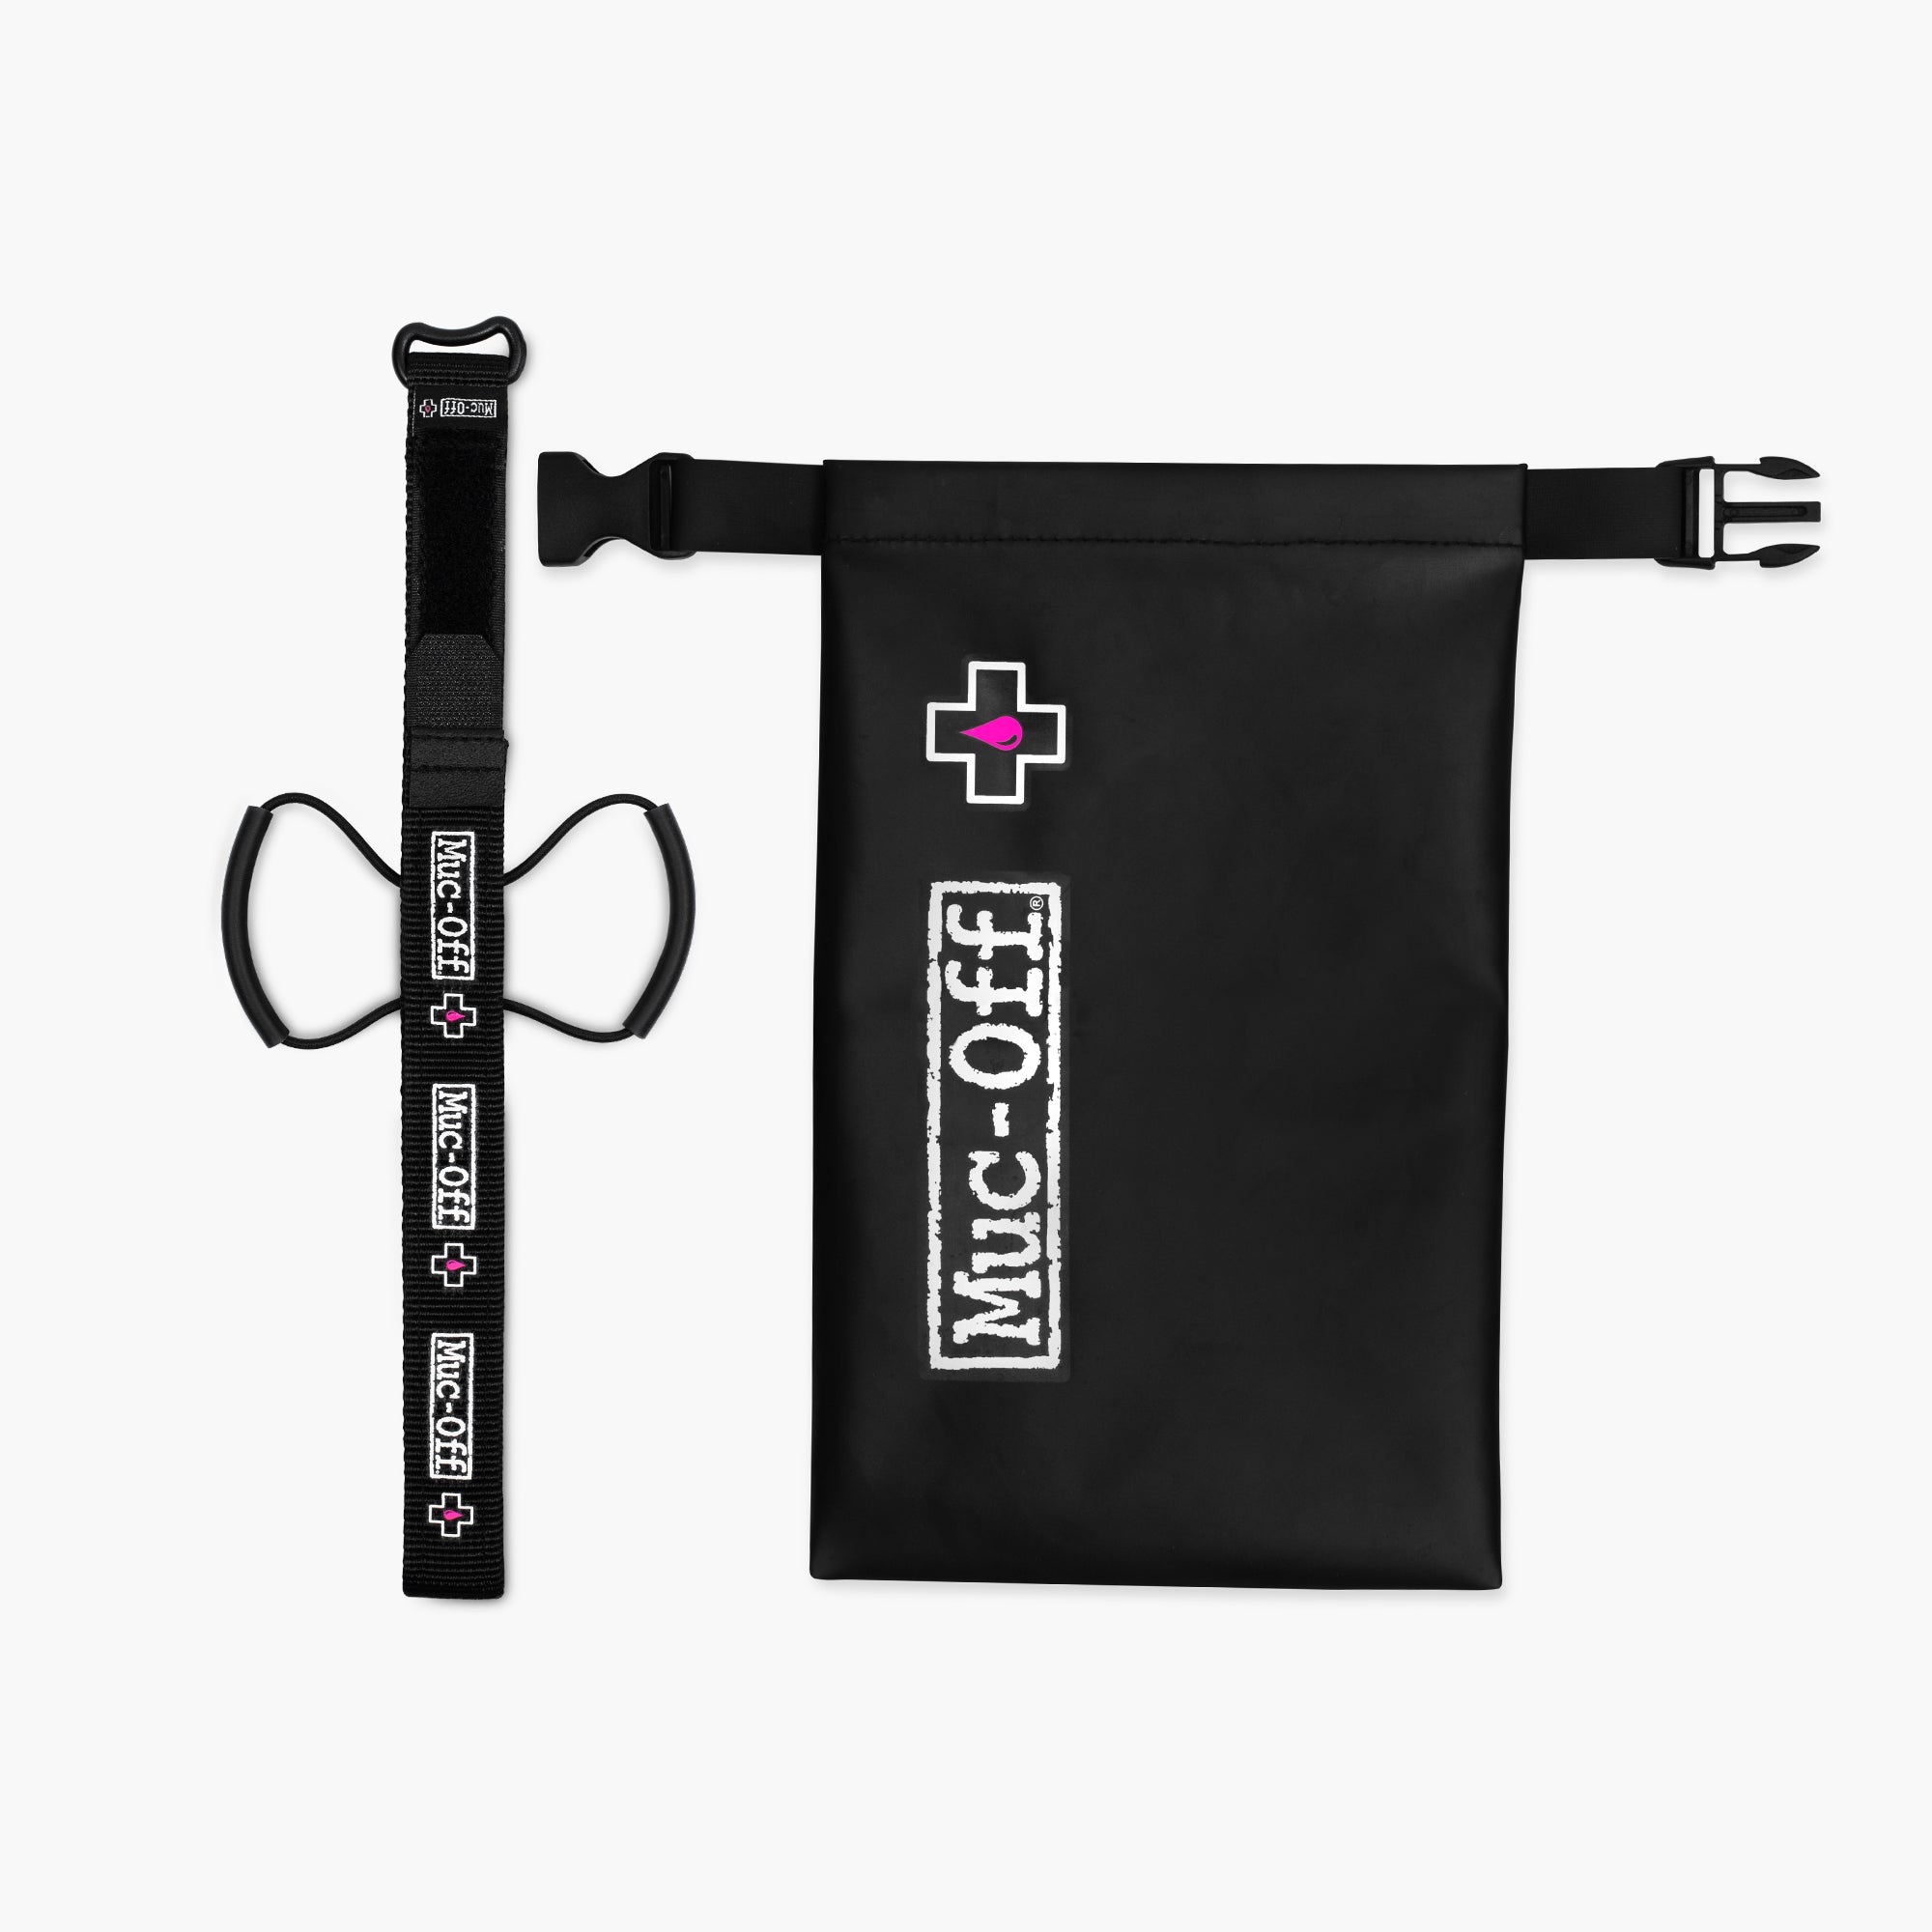 Muc-off Launches Utility Frame Strap and Waterproof Cargo Bag